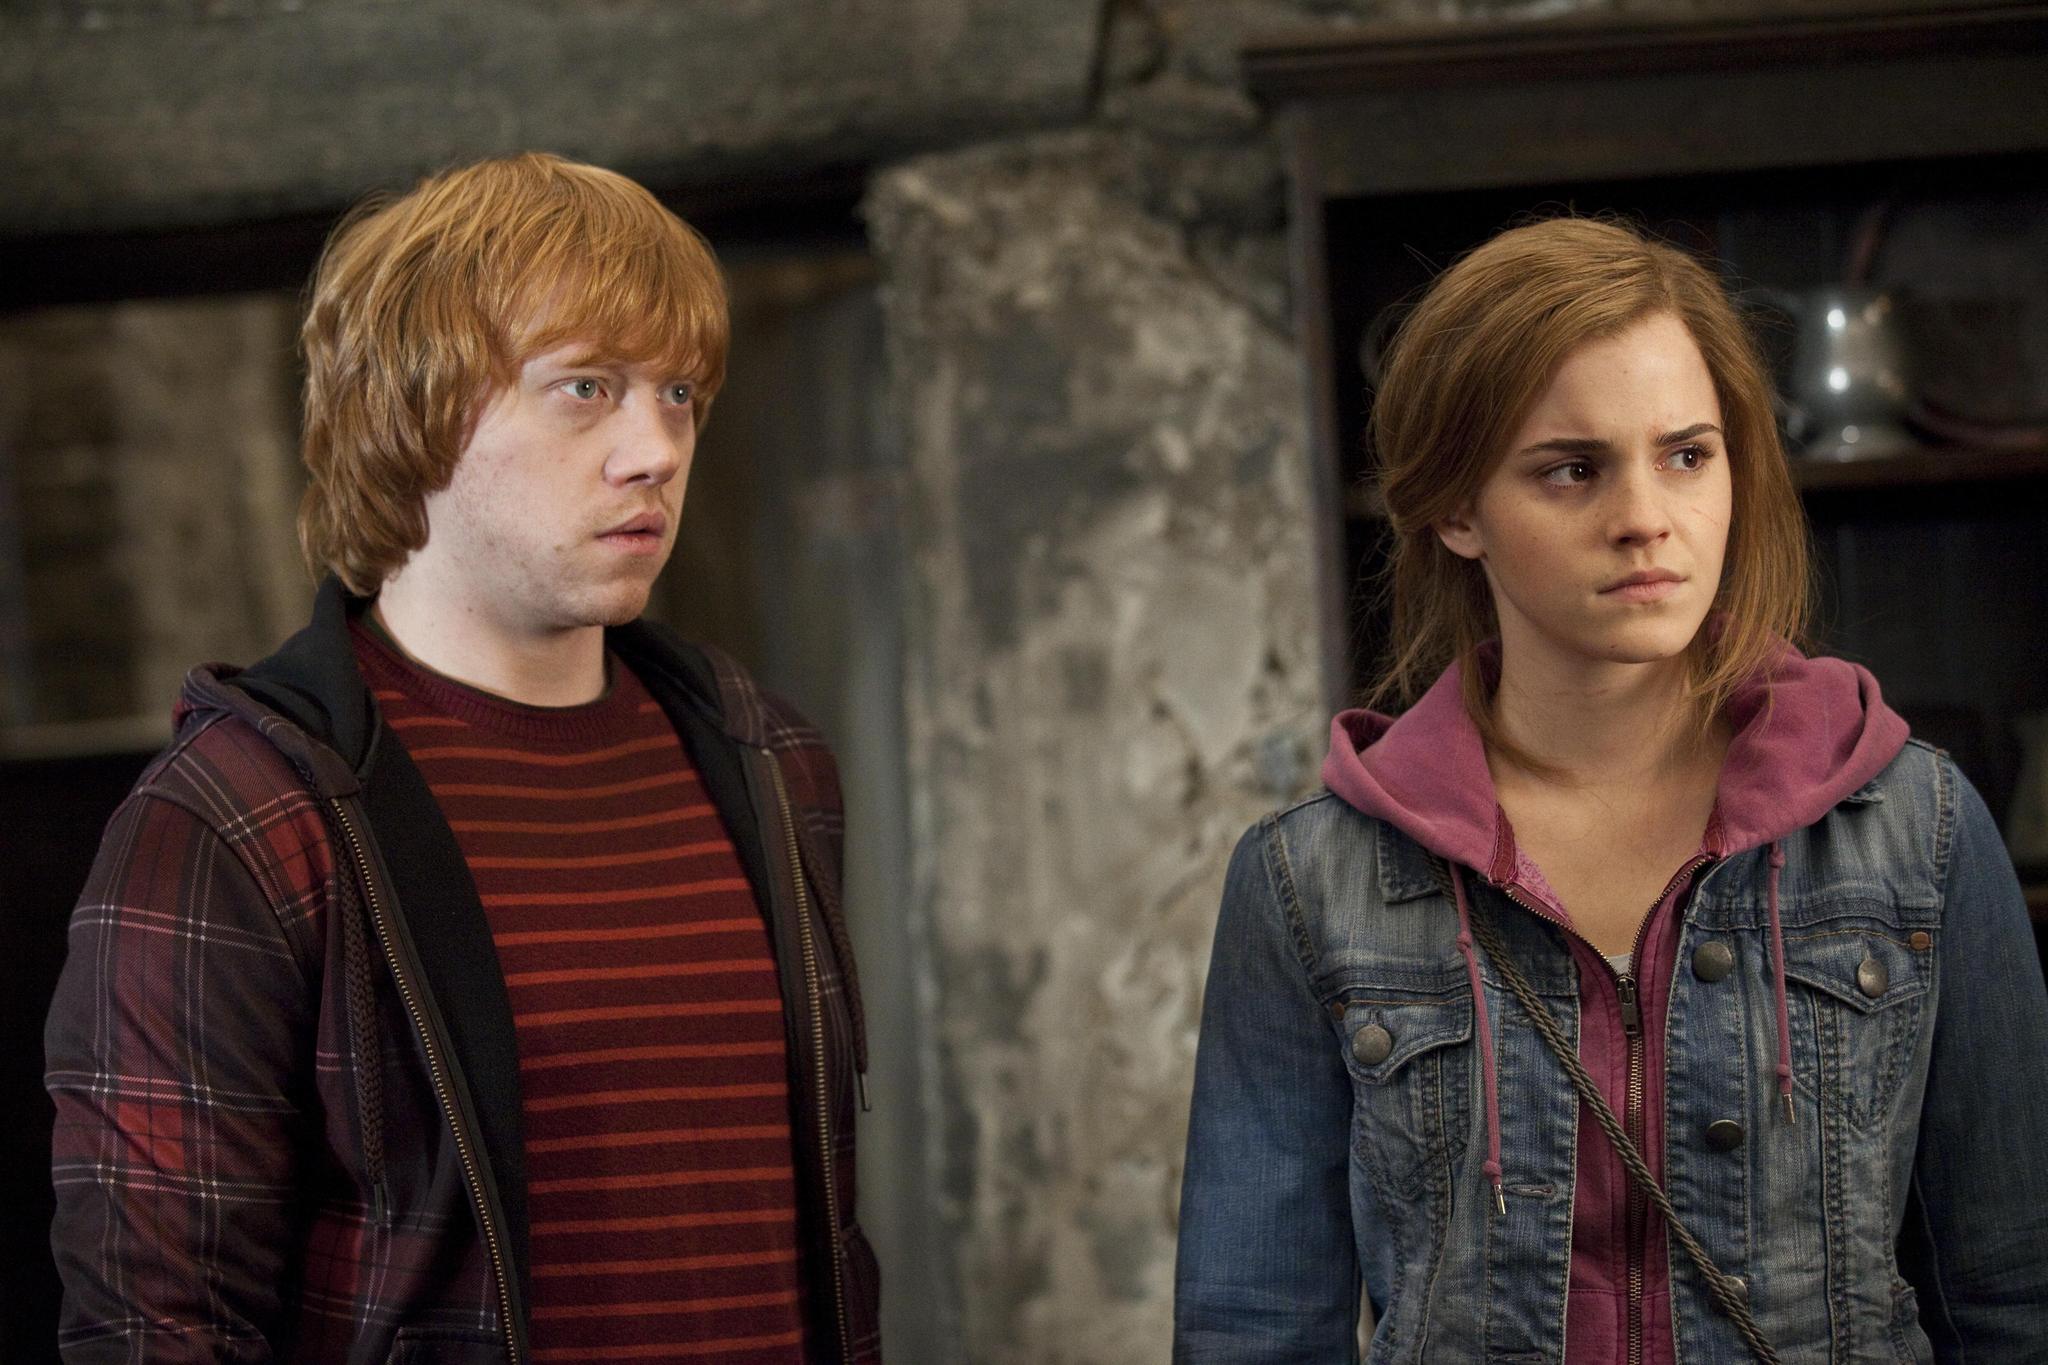 Rupert Grint played Ron Wesley for a decade of his life - J.K. Rowling